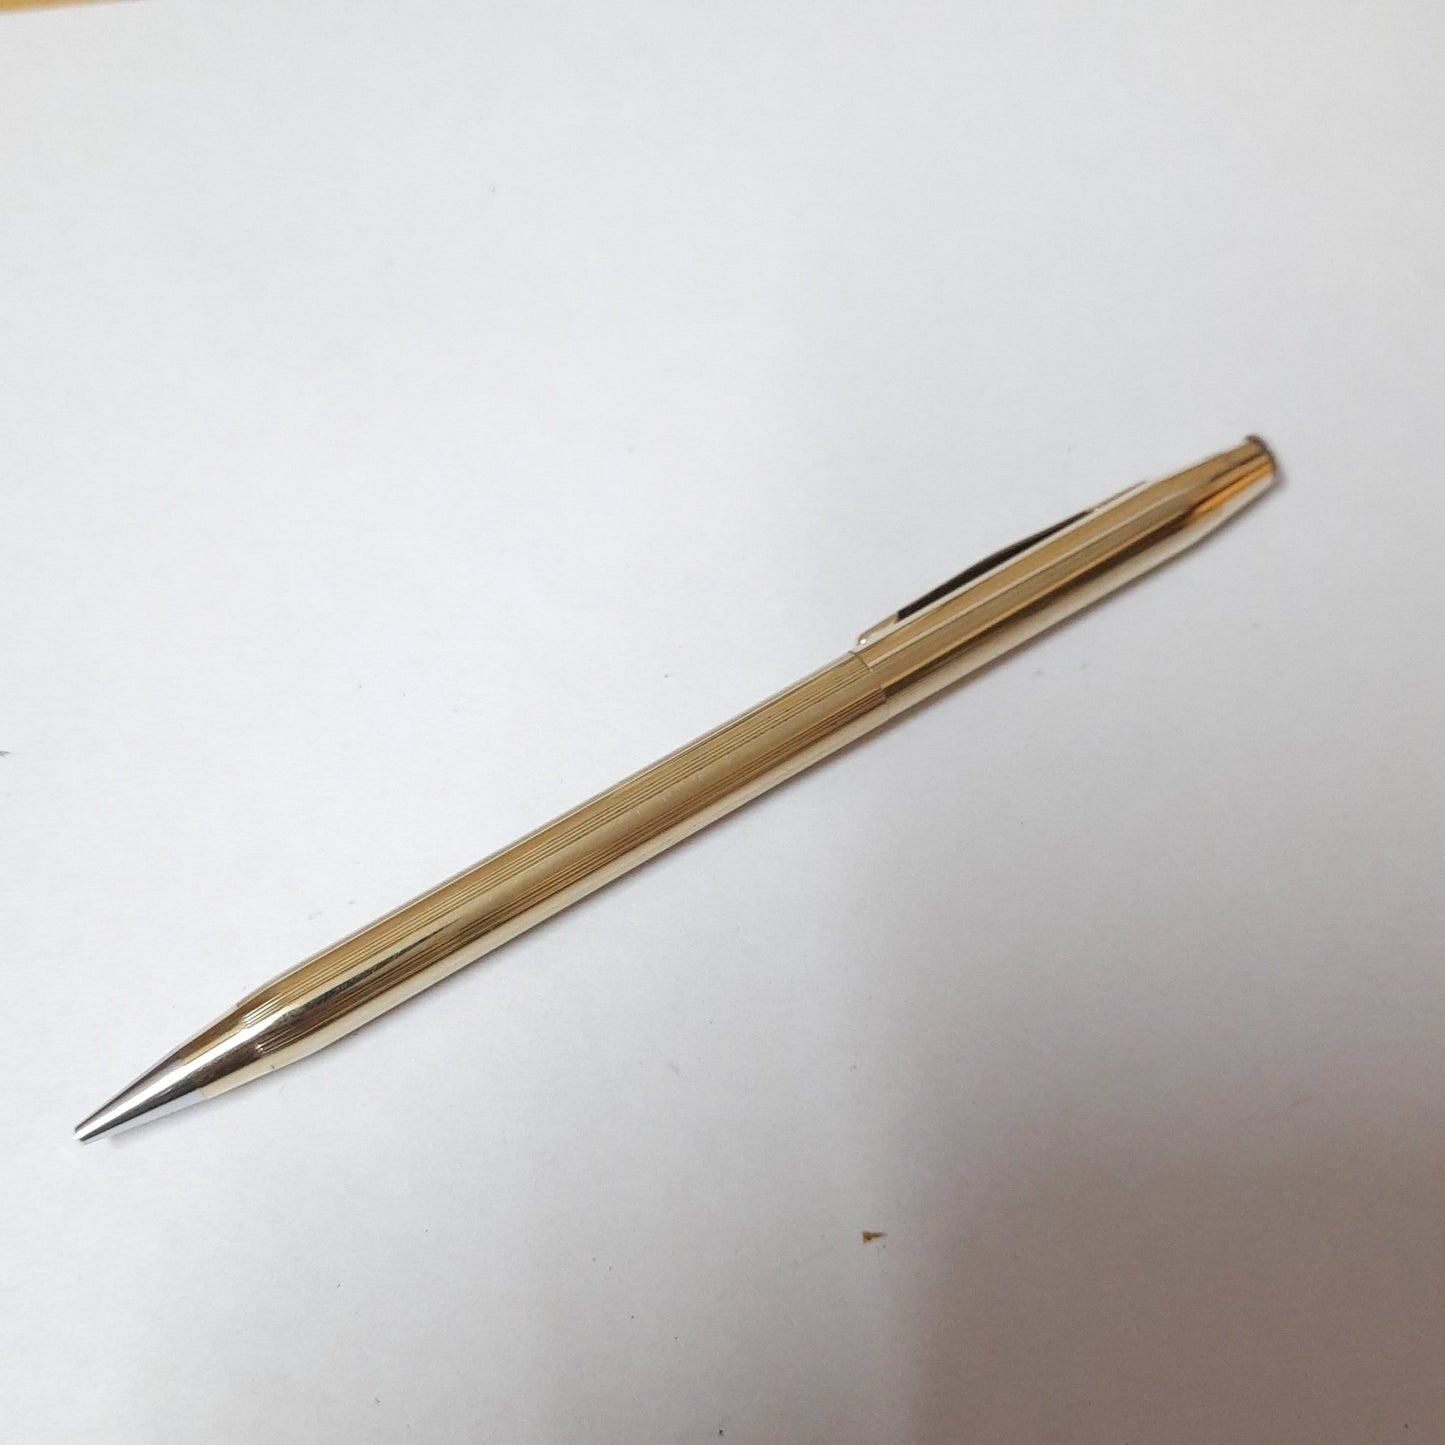 Cross 1/20 12kt Rolled Gold Mechanical Pencil Made In Ireland